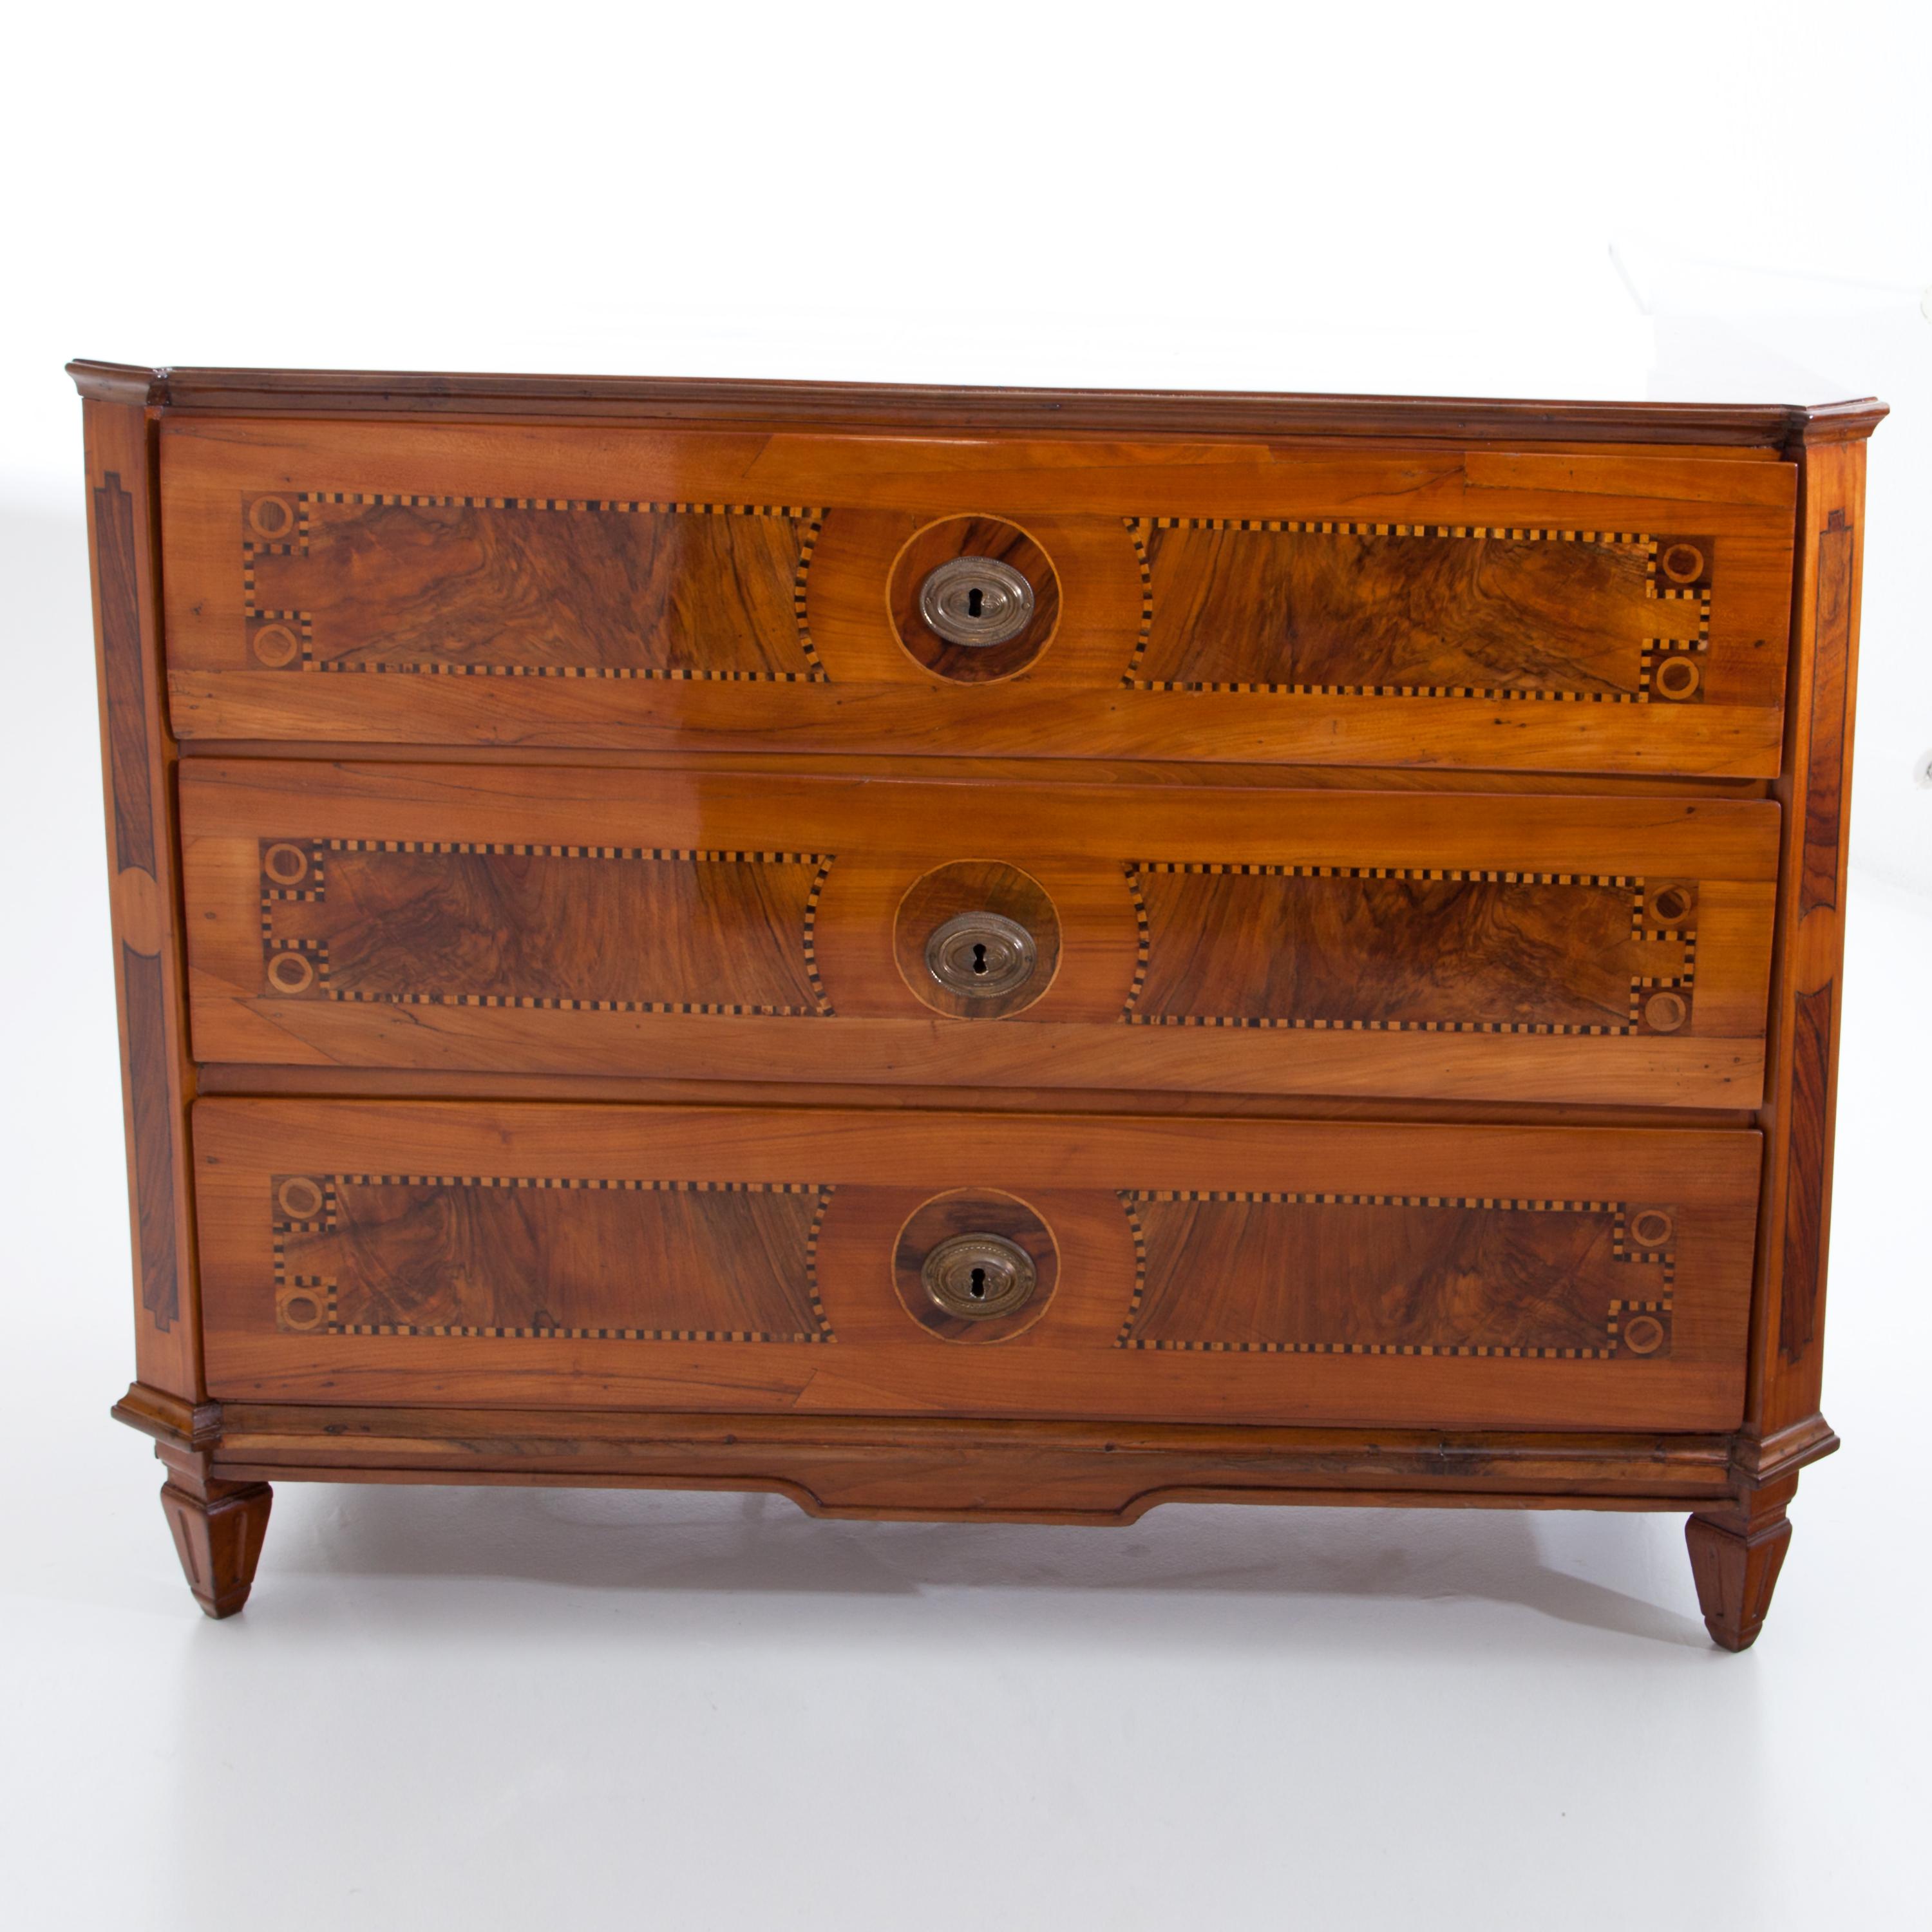 German Louis Seize Chest of Drawers, End of 18th Century